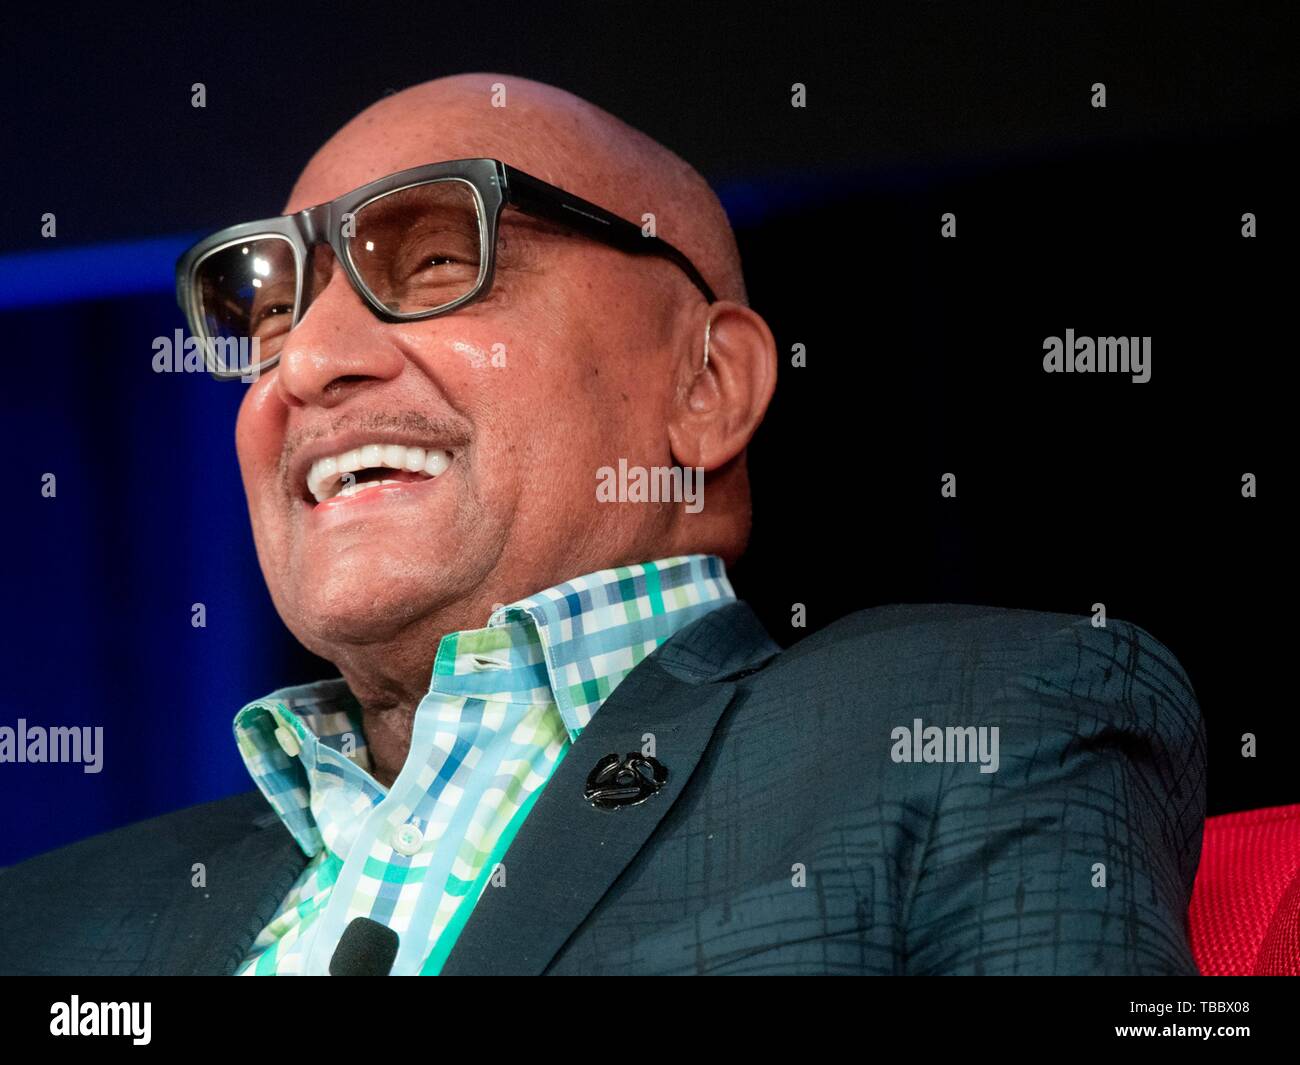 Duke Fakir, founding member of The Four Tops, discusses music as activism and social expression during the Summit on Race in America at the LBJ Presidential Library April 13, 2019 in Austin, Texas. Stock Photo